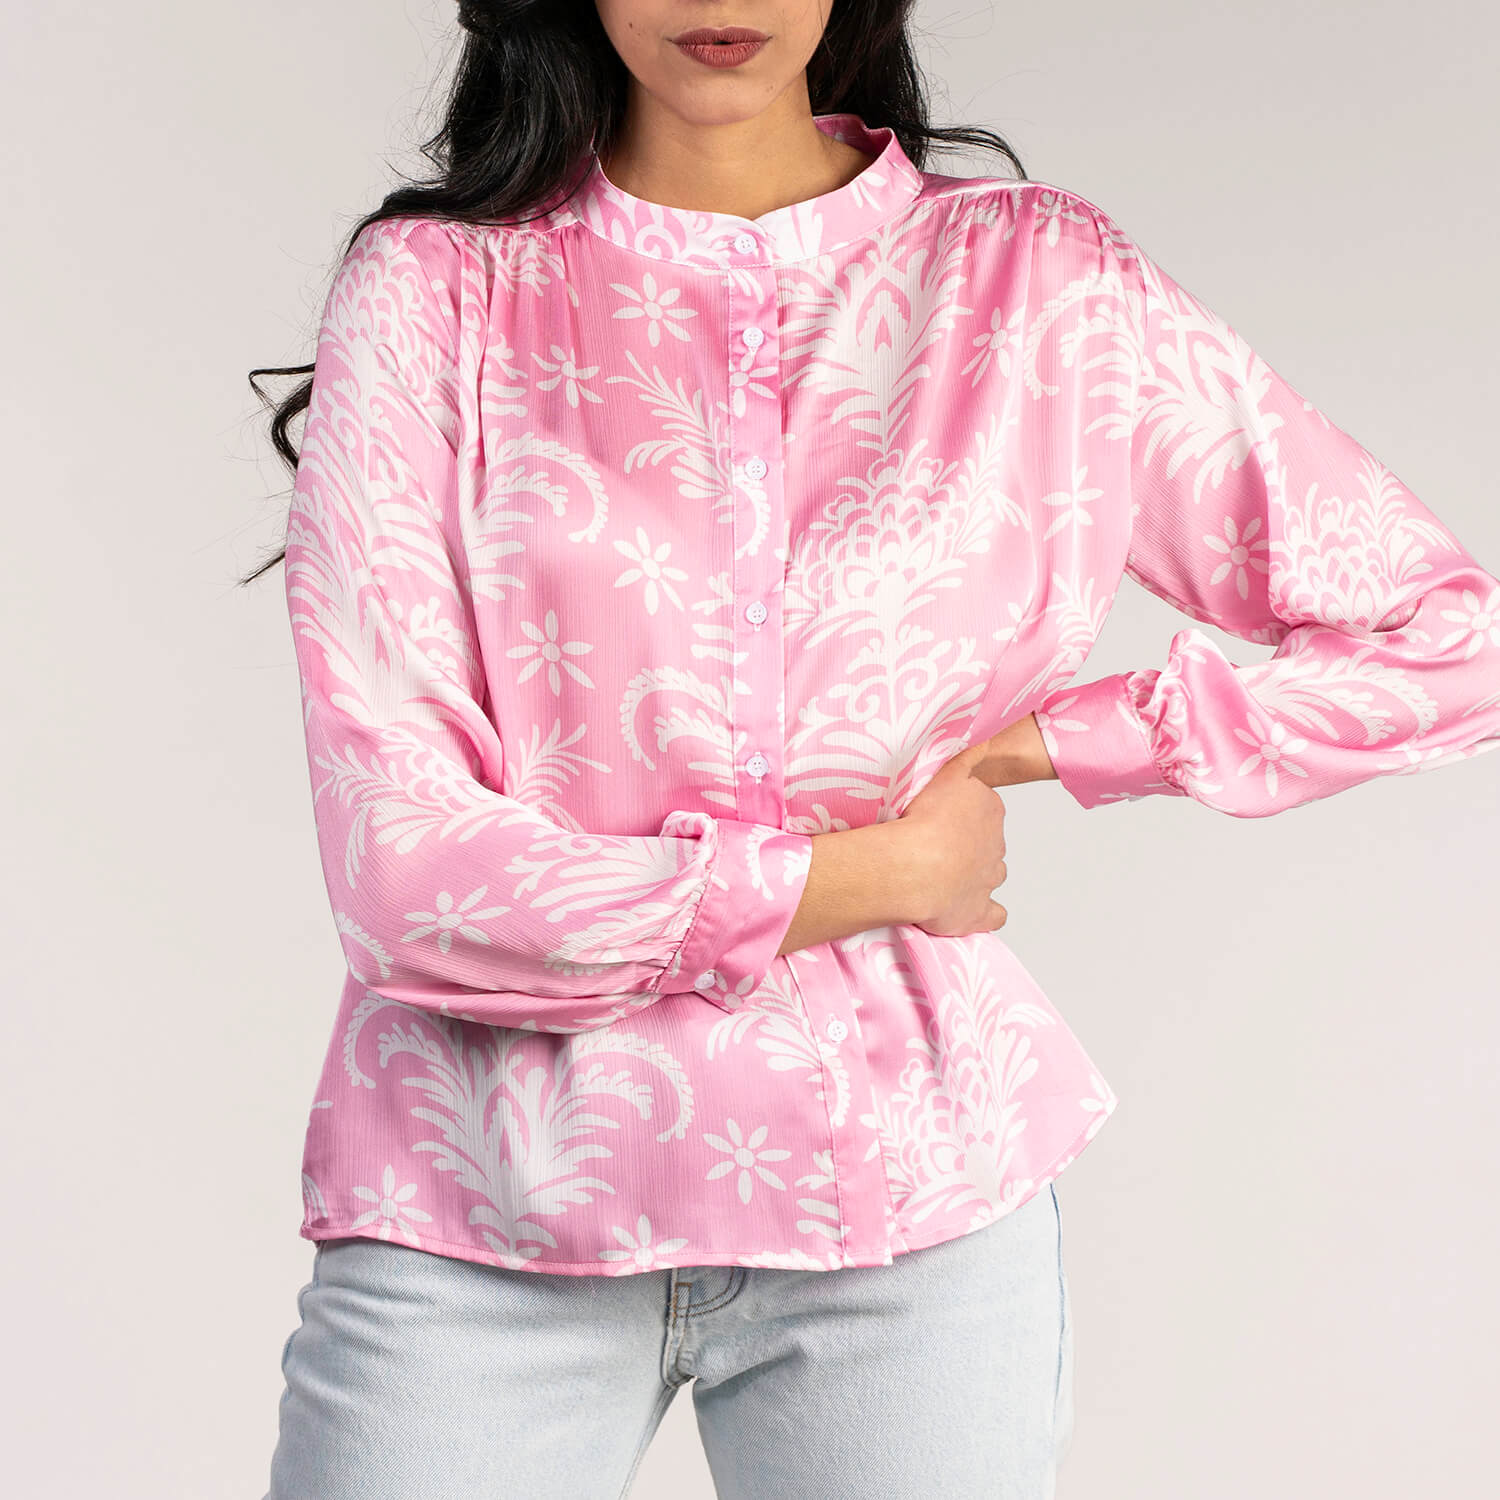 Naoise Print Crepe Blouse - Pink 1 Shaws Department Stores